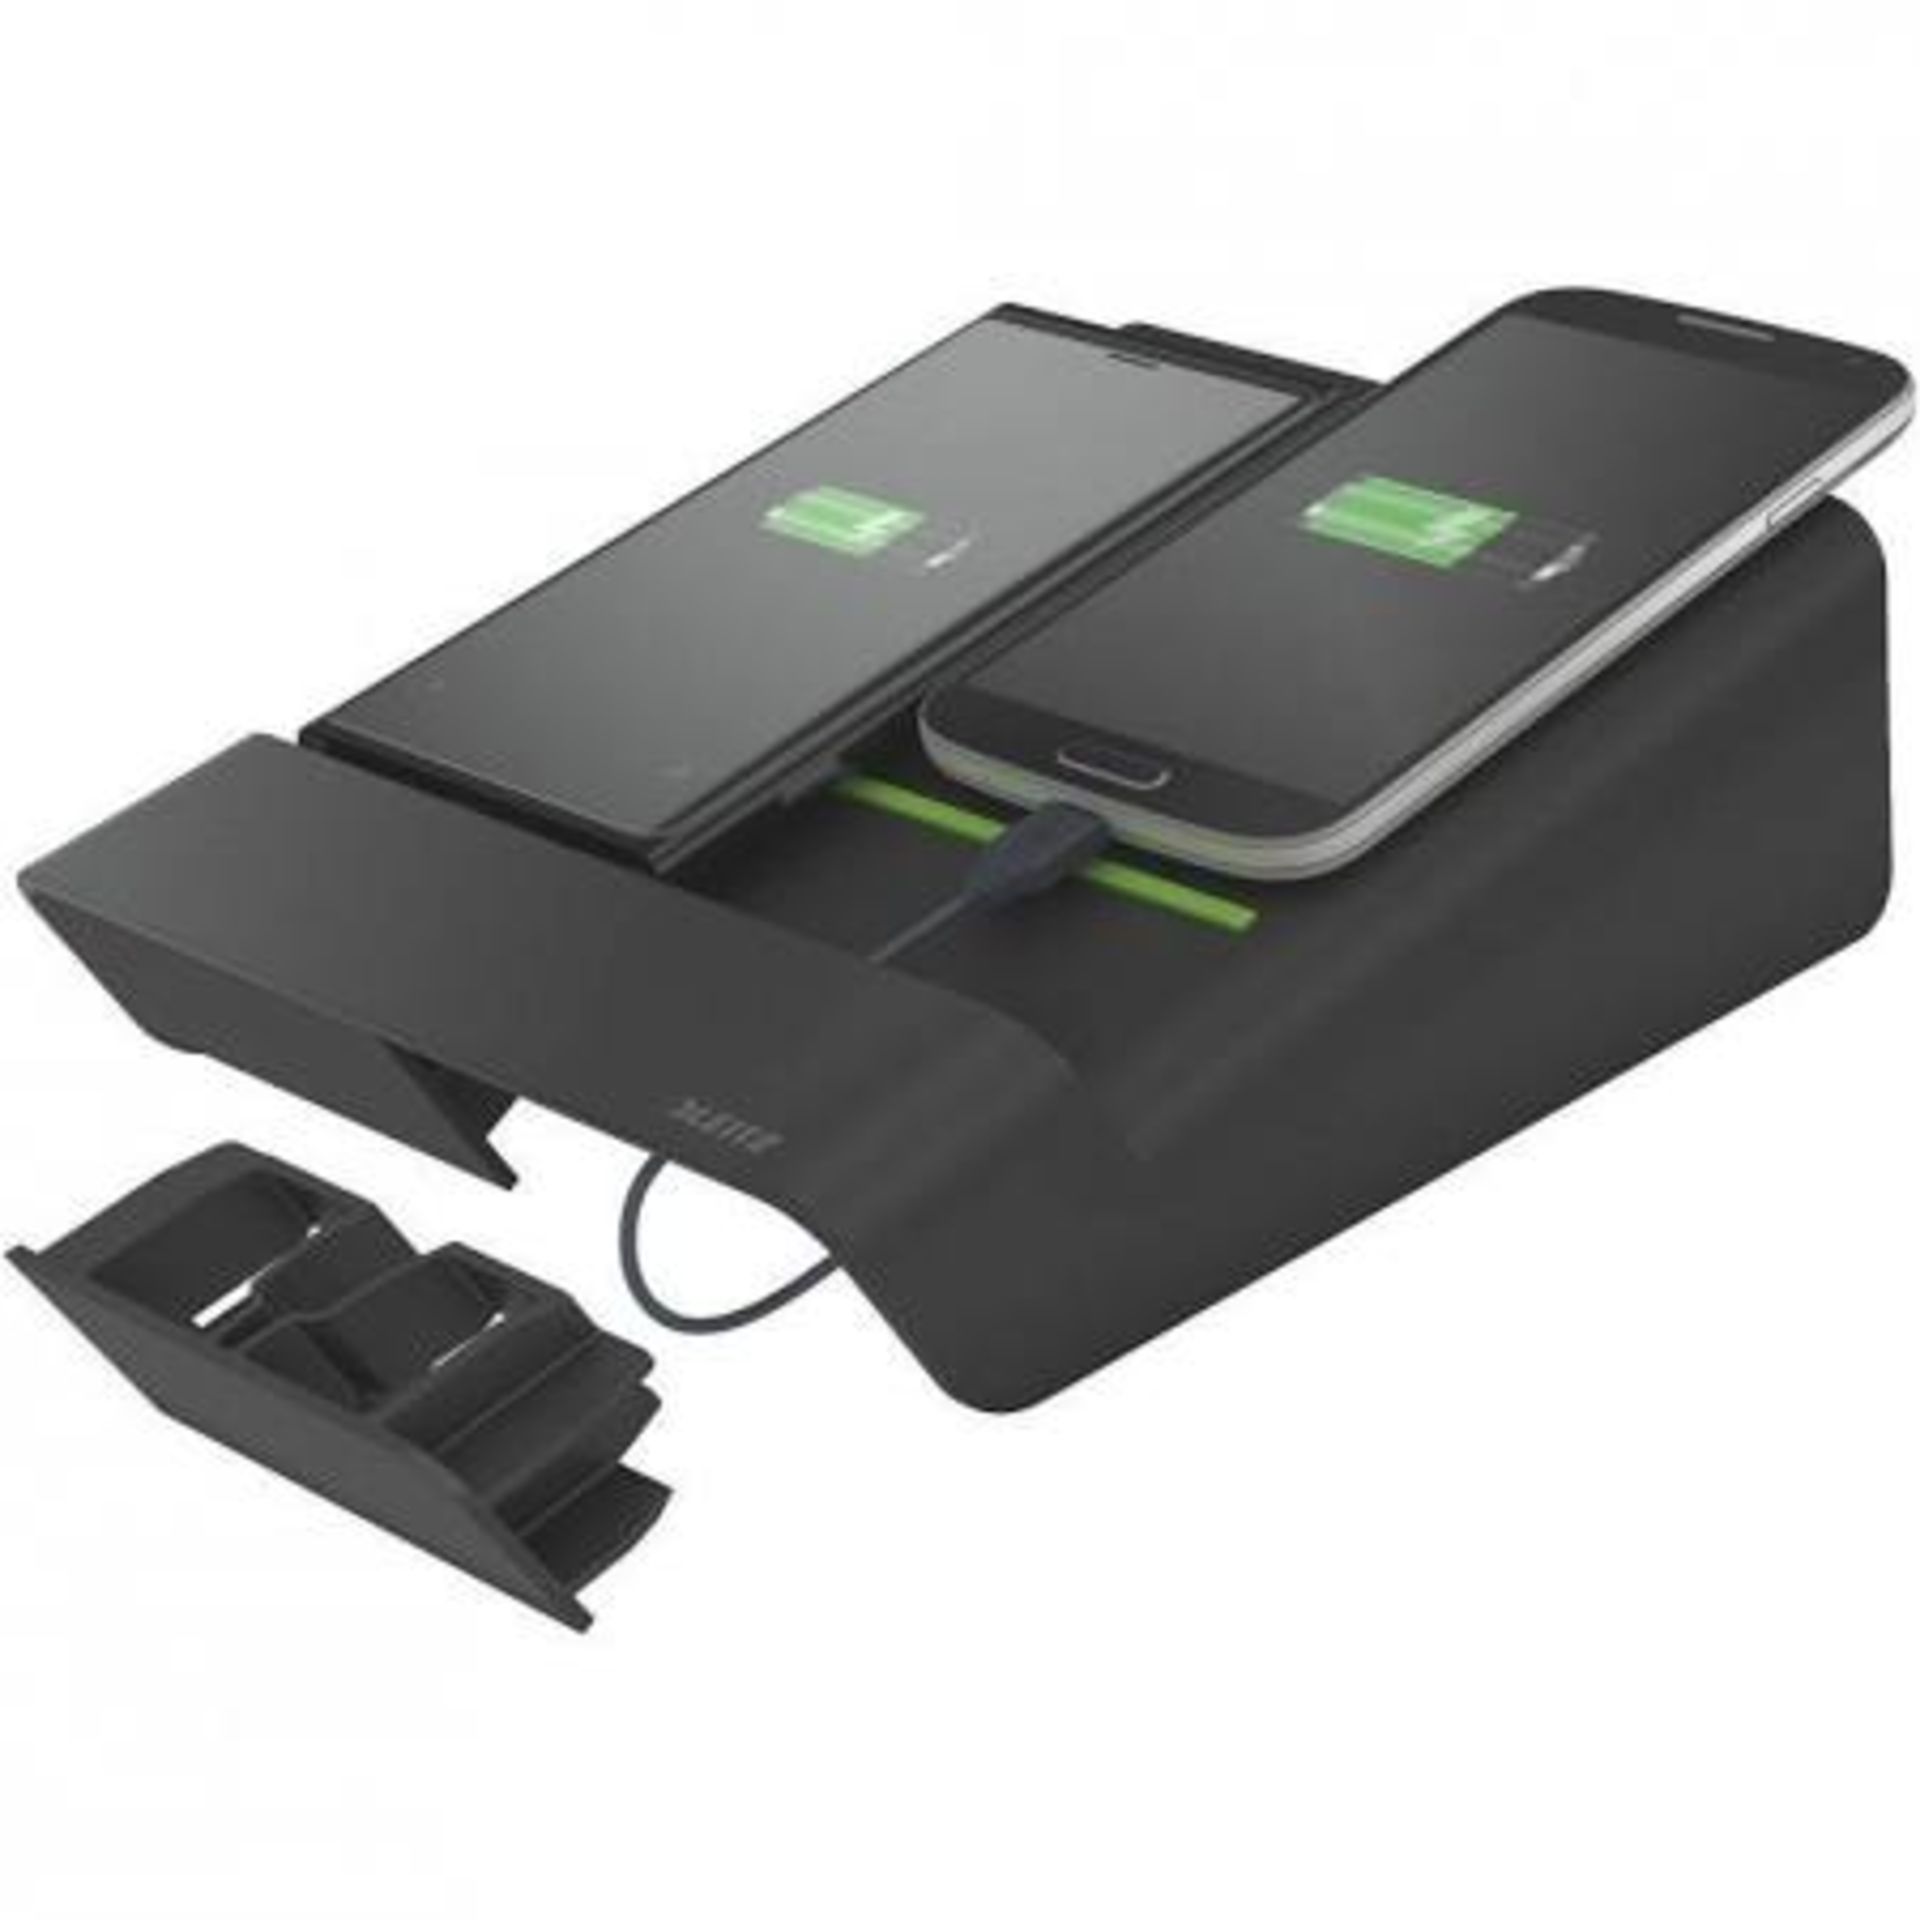 100x Leitz Duofone Smartcharger